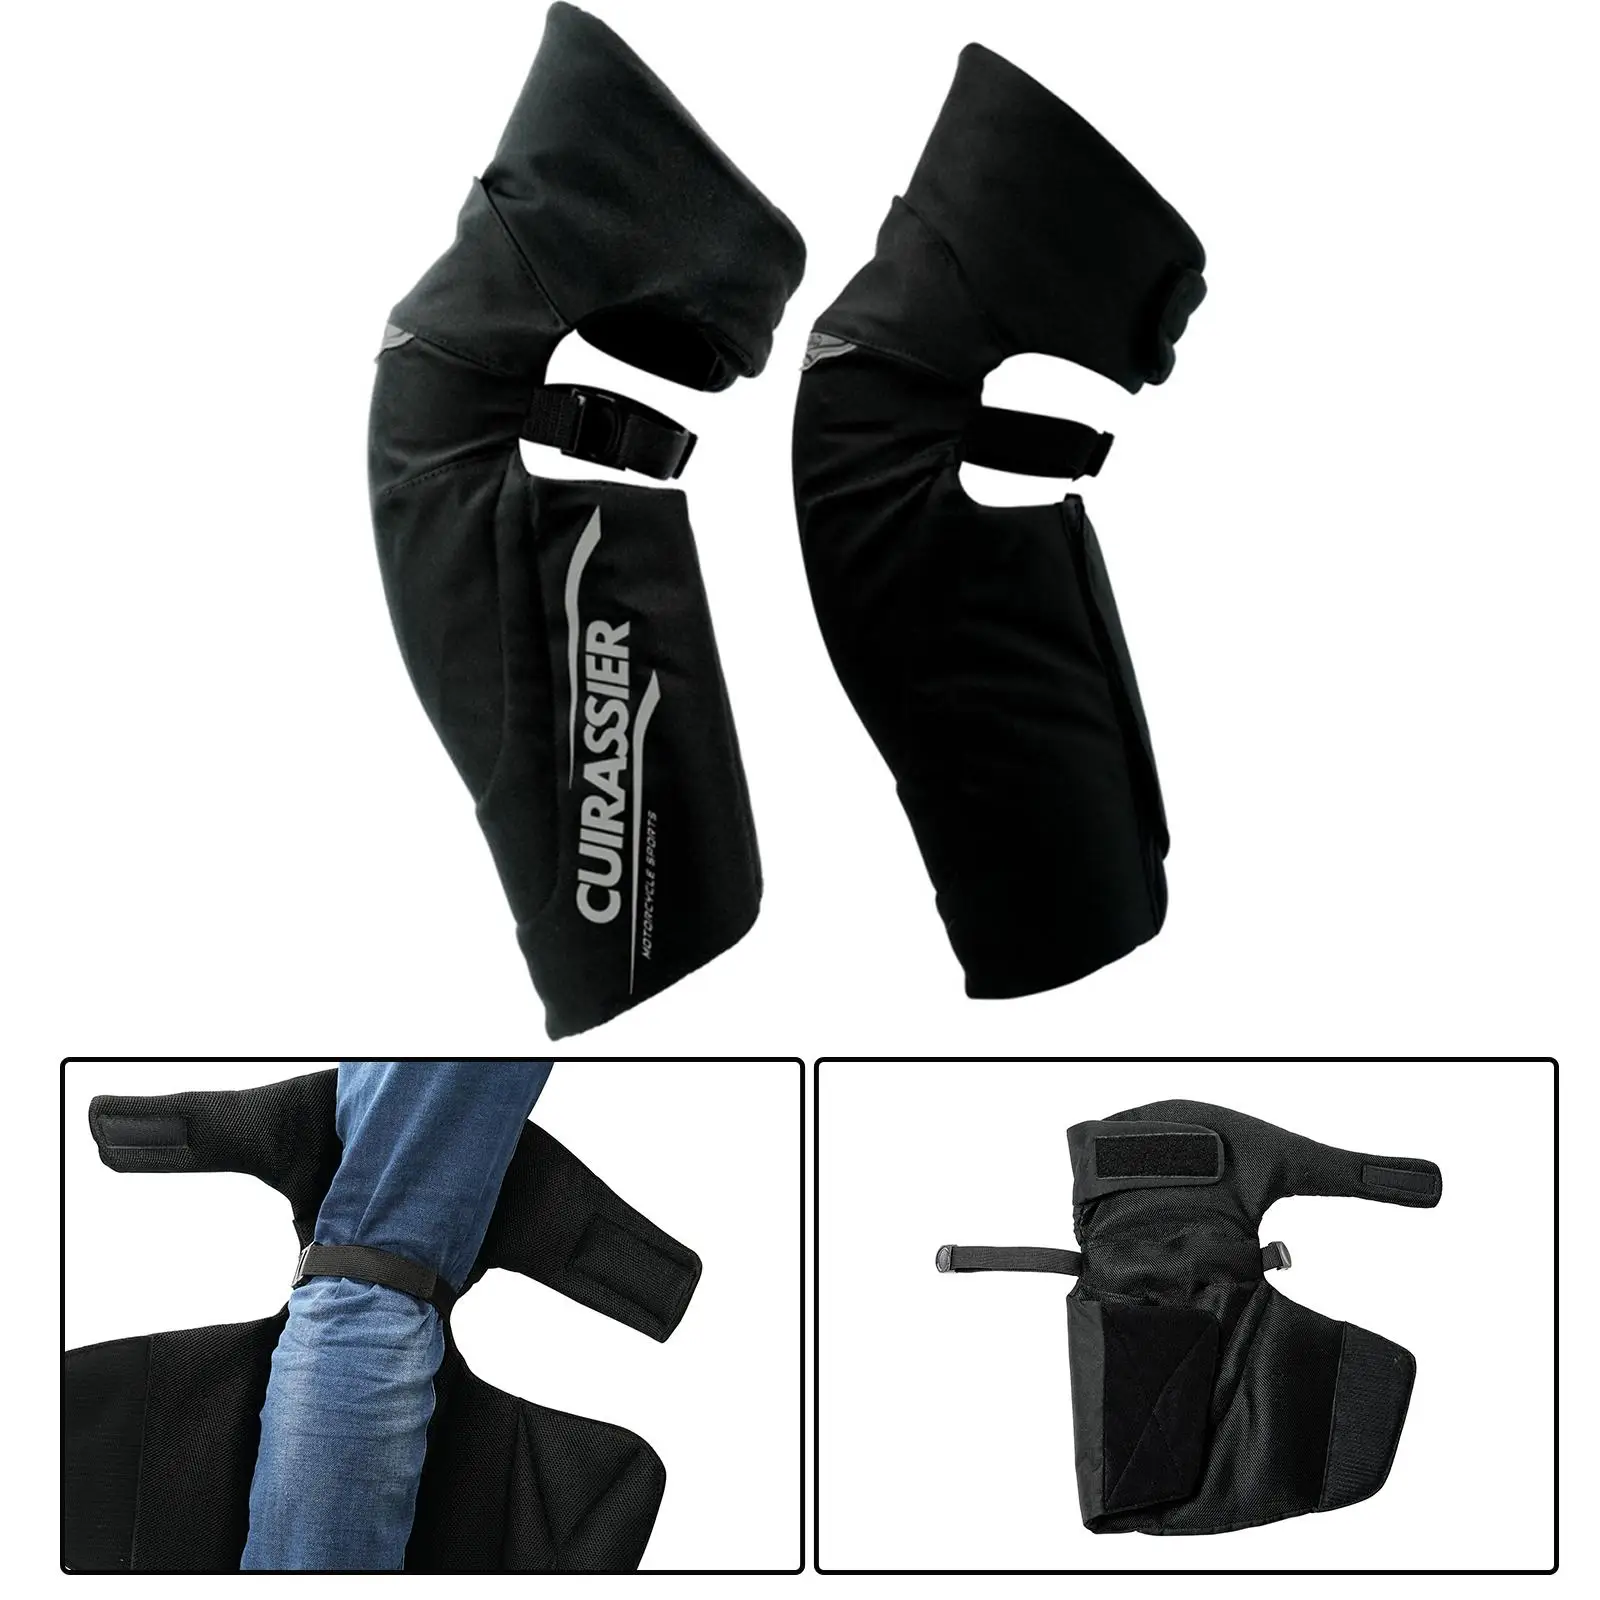 Motorcycle Knee Pads Guards Protective Gear Leggings Covers Fit for Cycling